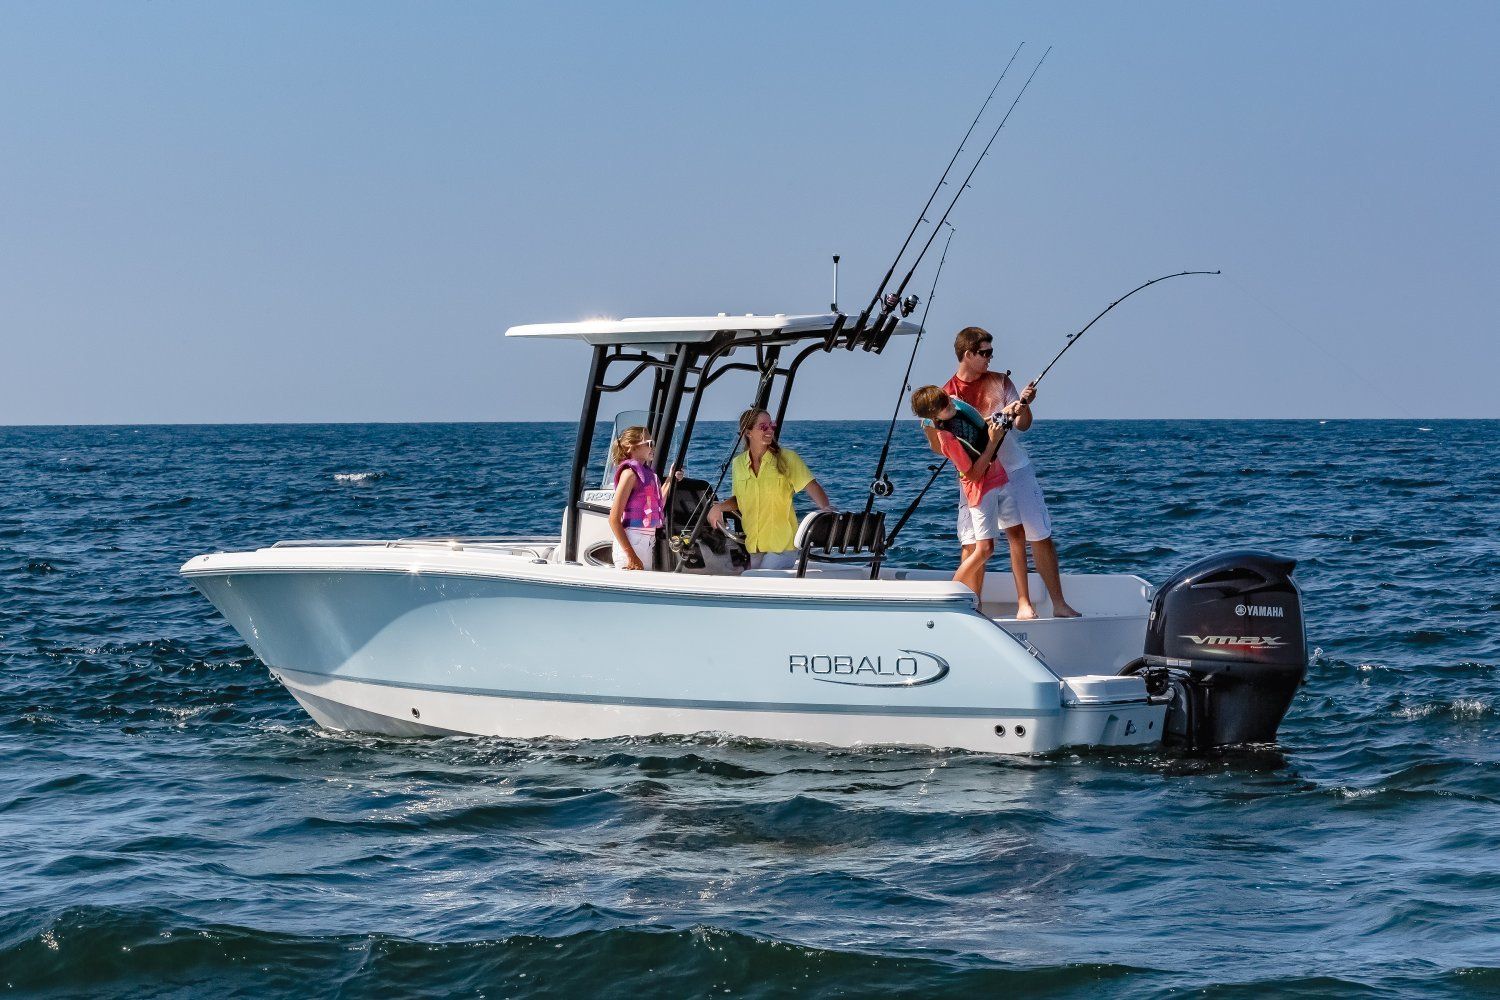 A family of four, with the dad and the son fishing, all on a Robalo R230